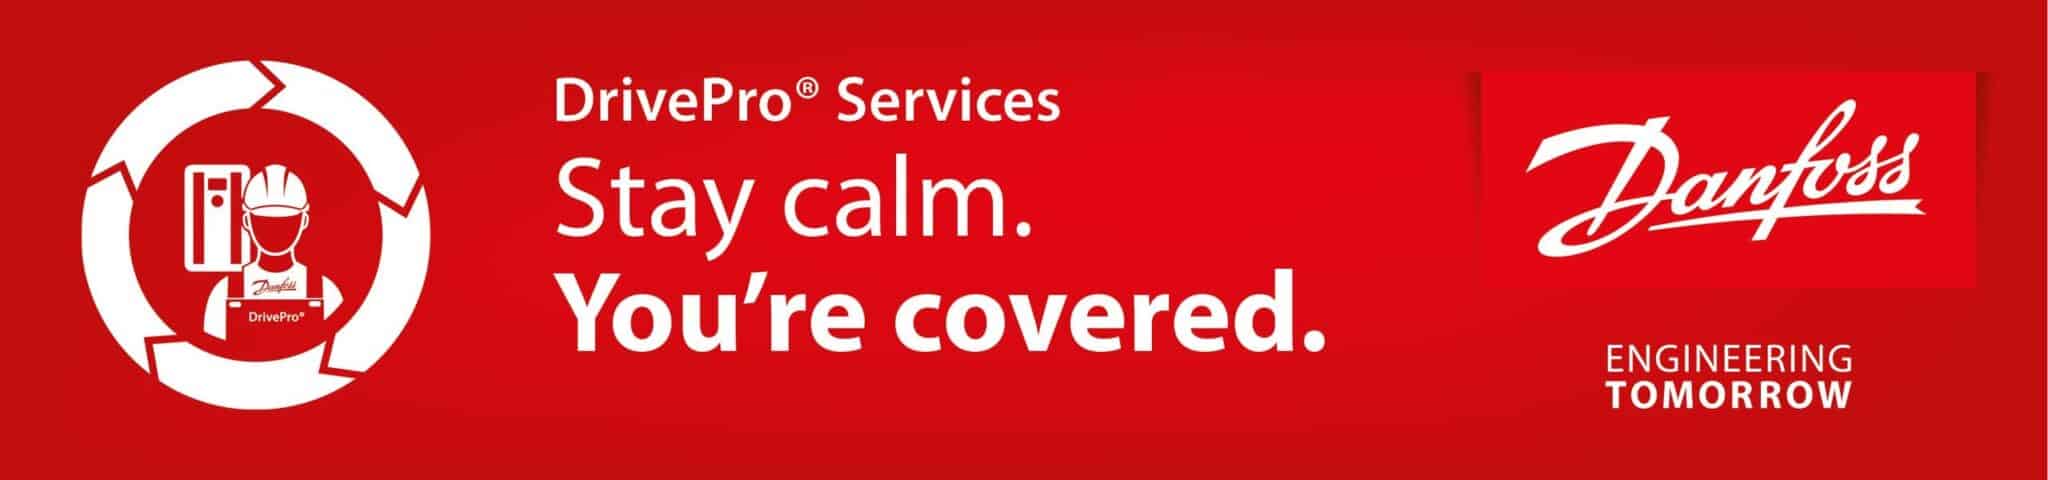 DrivePro lifecycle service stay calm youre covered